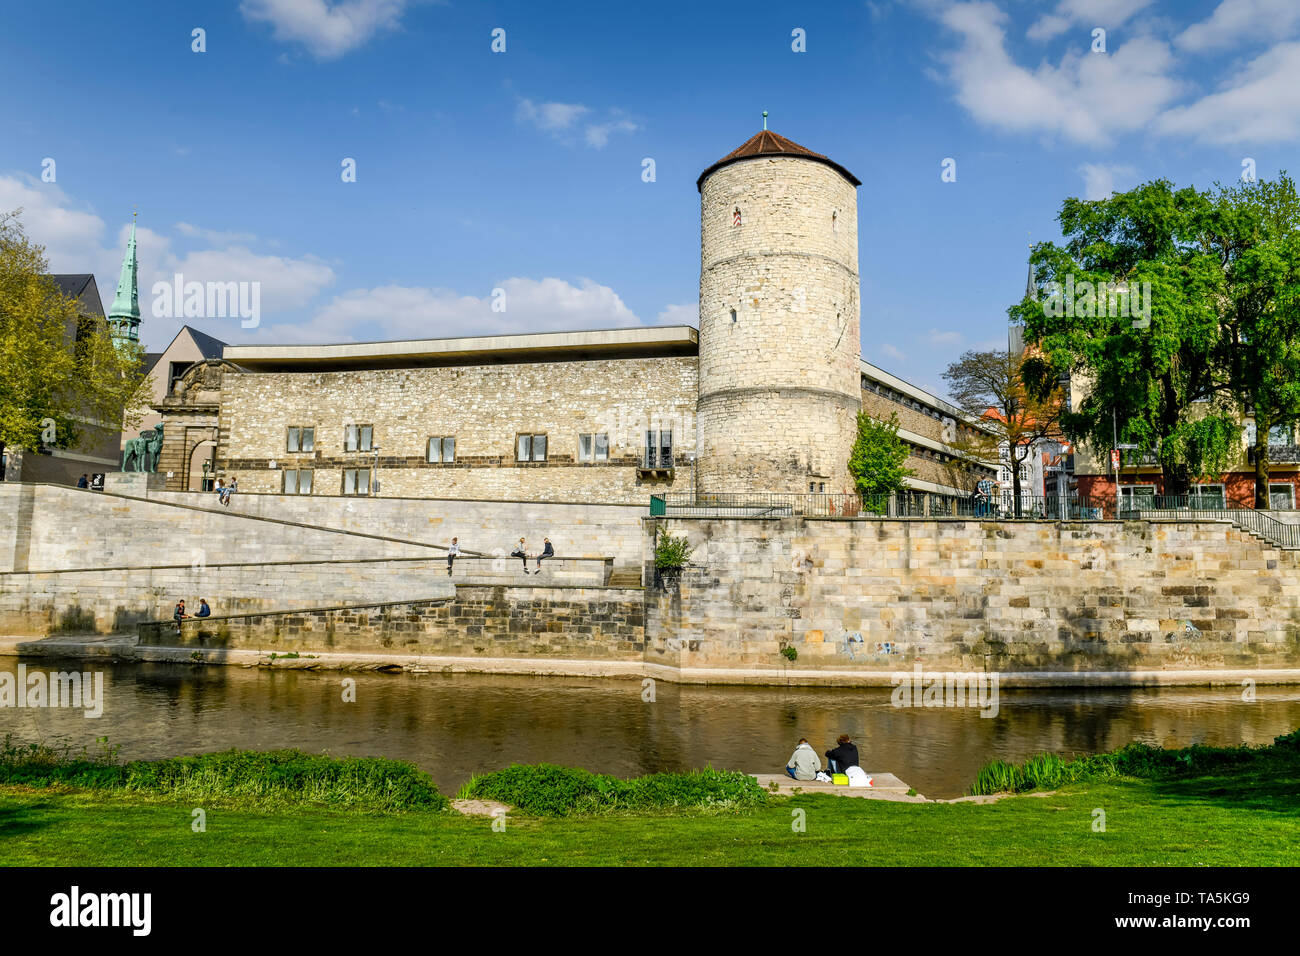 Historical museum with lay female nurse's tower and armoury, on the high shore, Pferdestrasse, Hannover, Lower Saxony, Germany, Historisches Museum mi Stock Photo